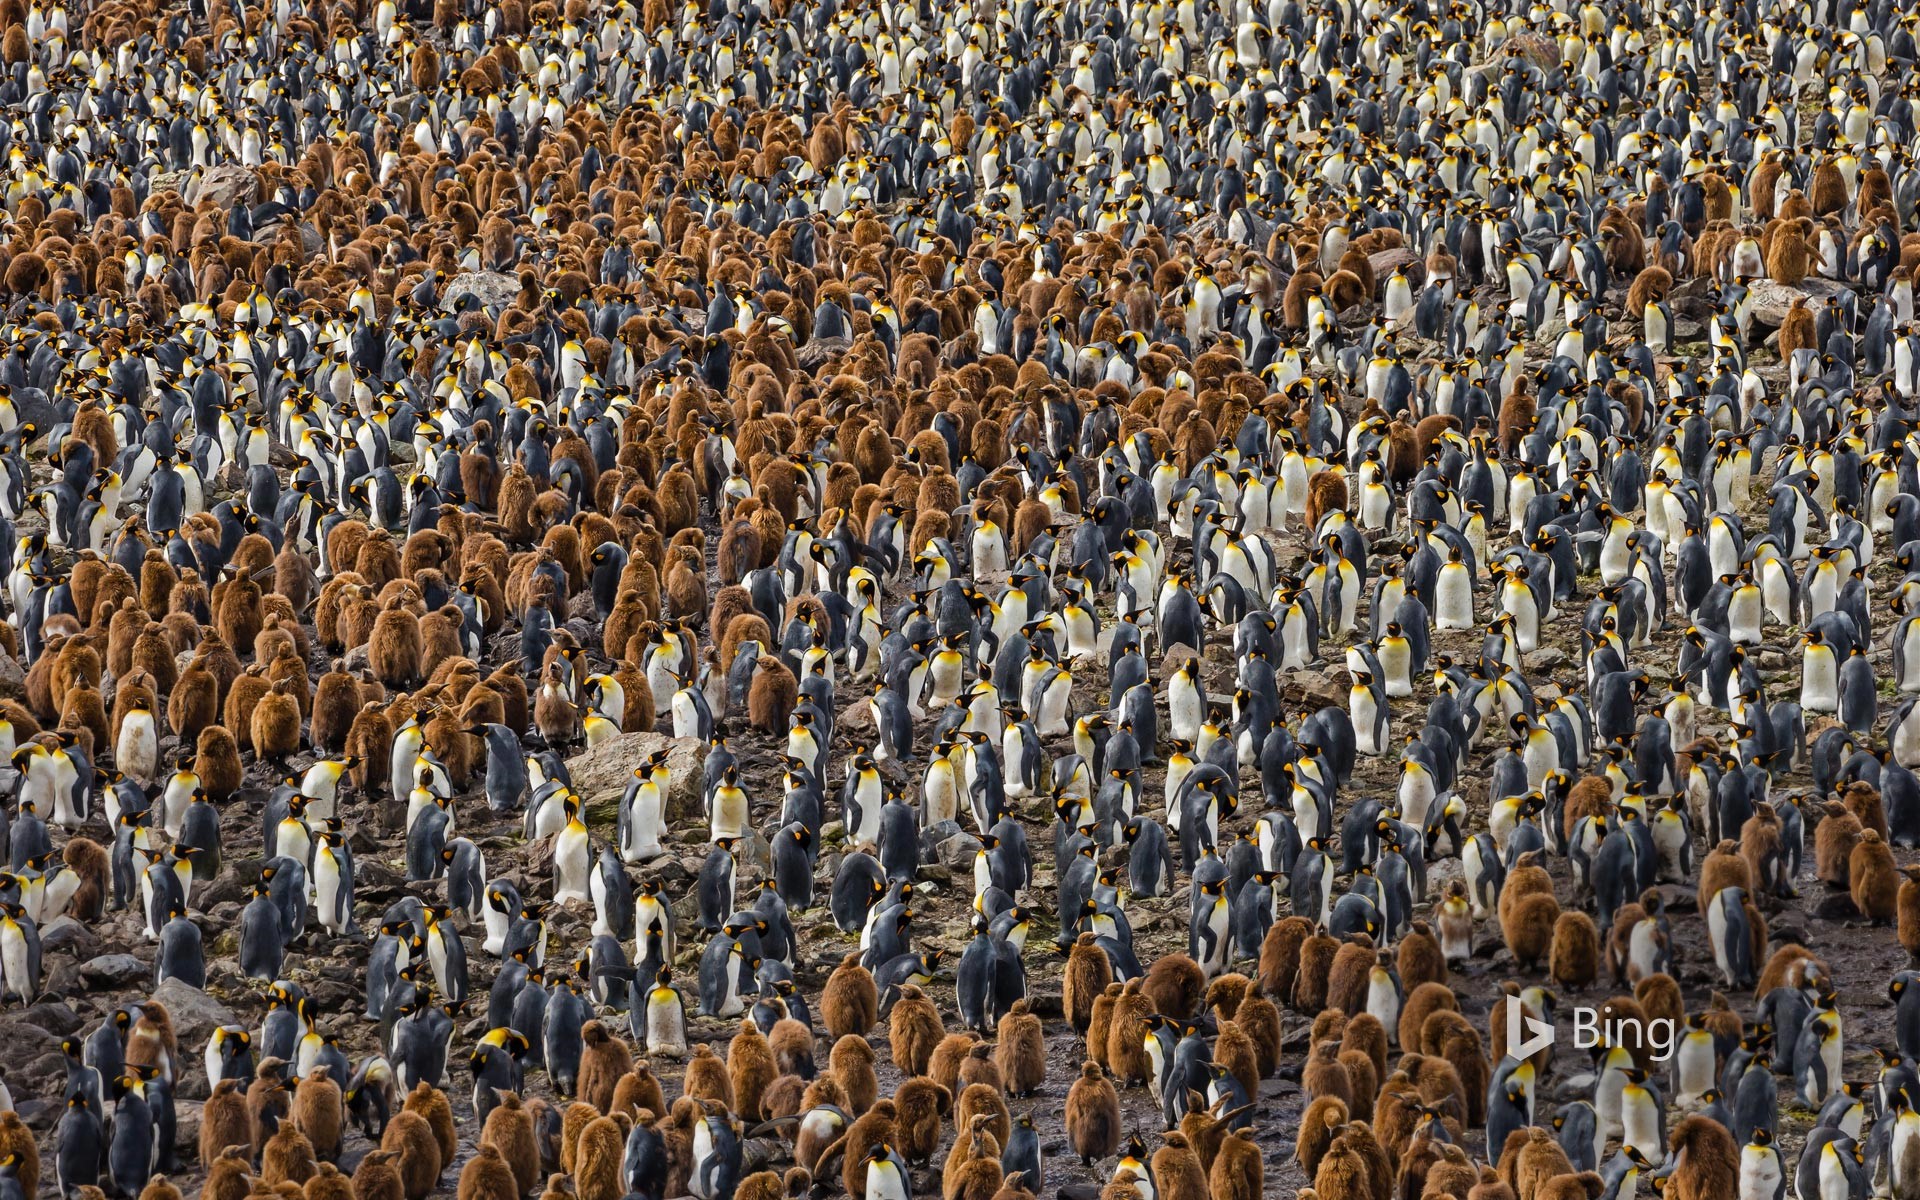 A nesting colony of king penguins in South Georgia, Antarctica